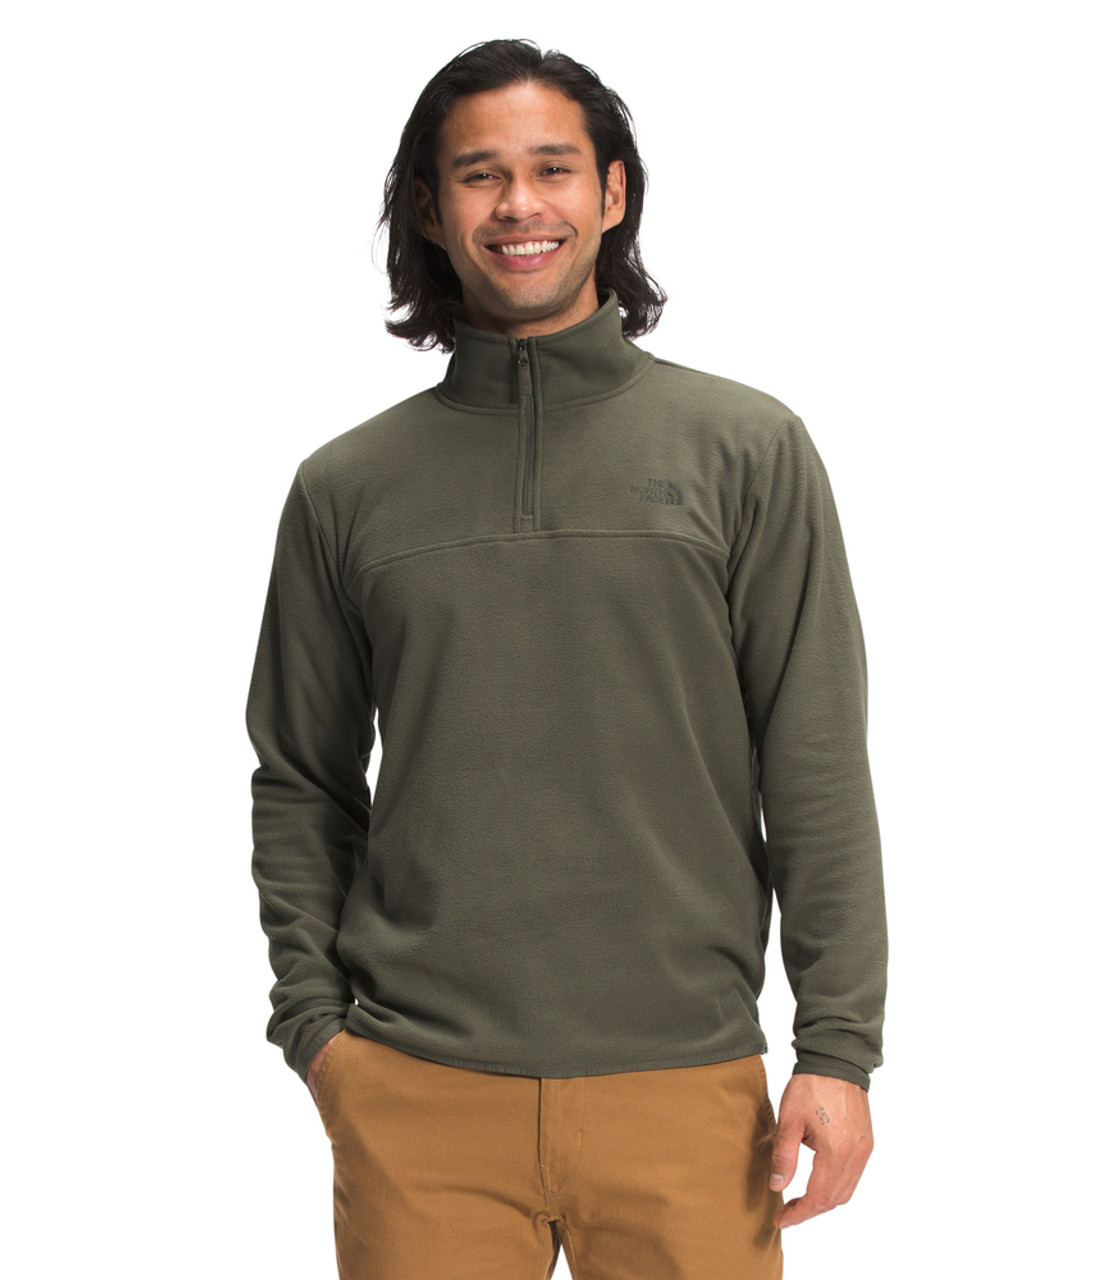 The North Face TKA Glacier Quarter-Zip Long-Sleeve Pullover for